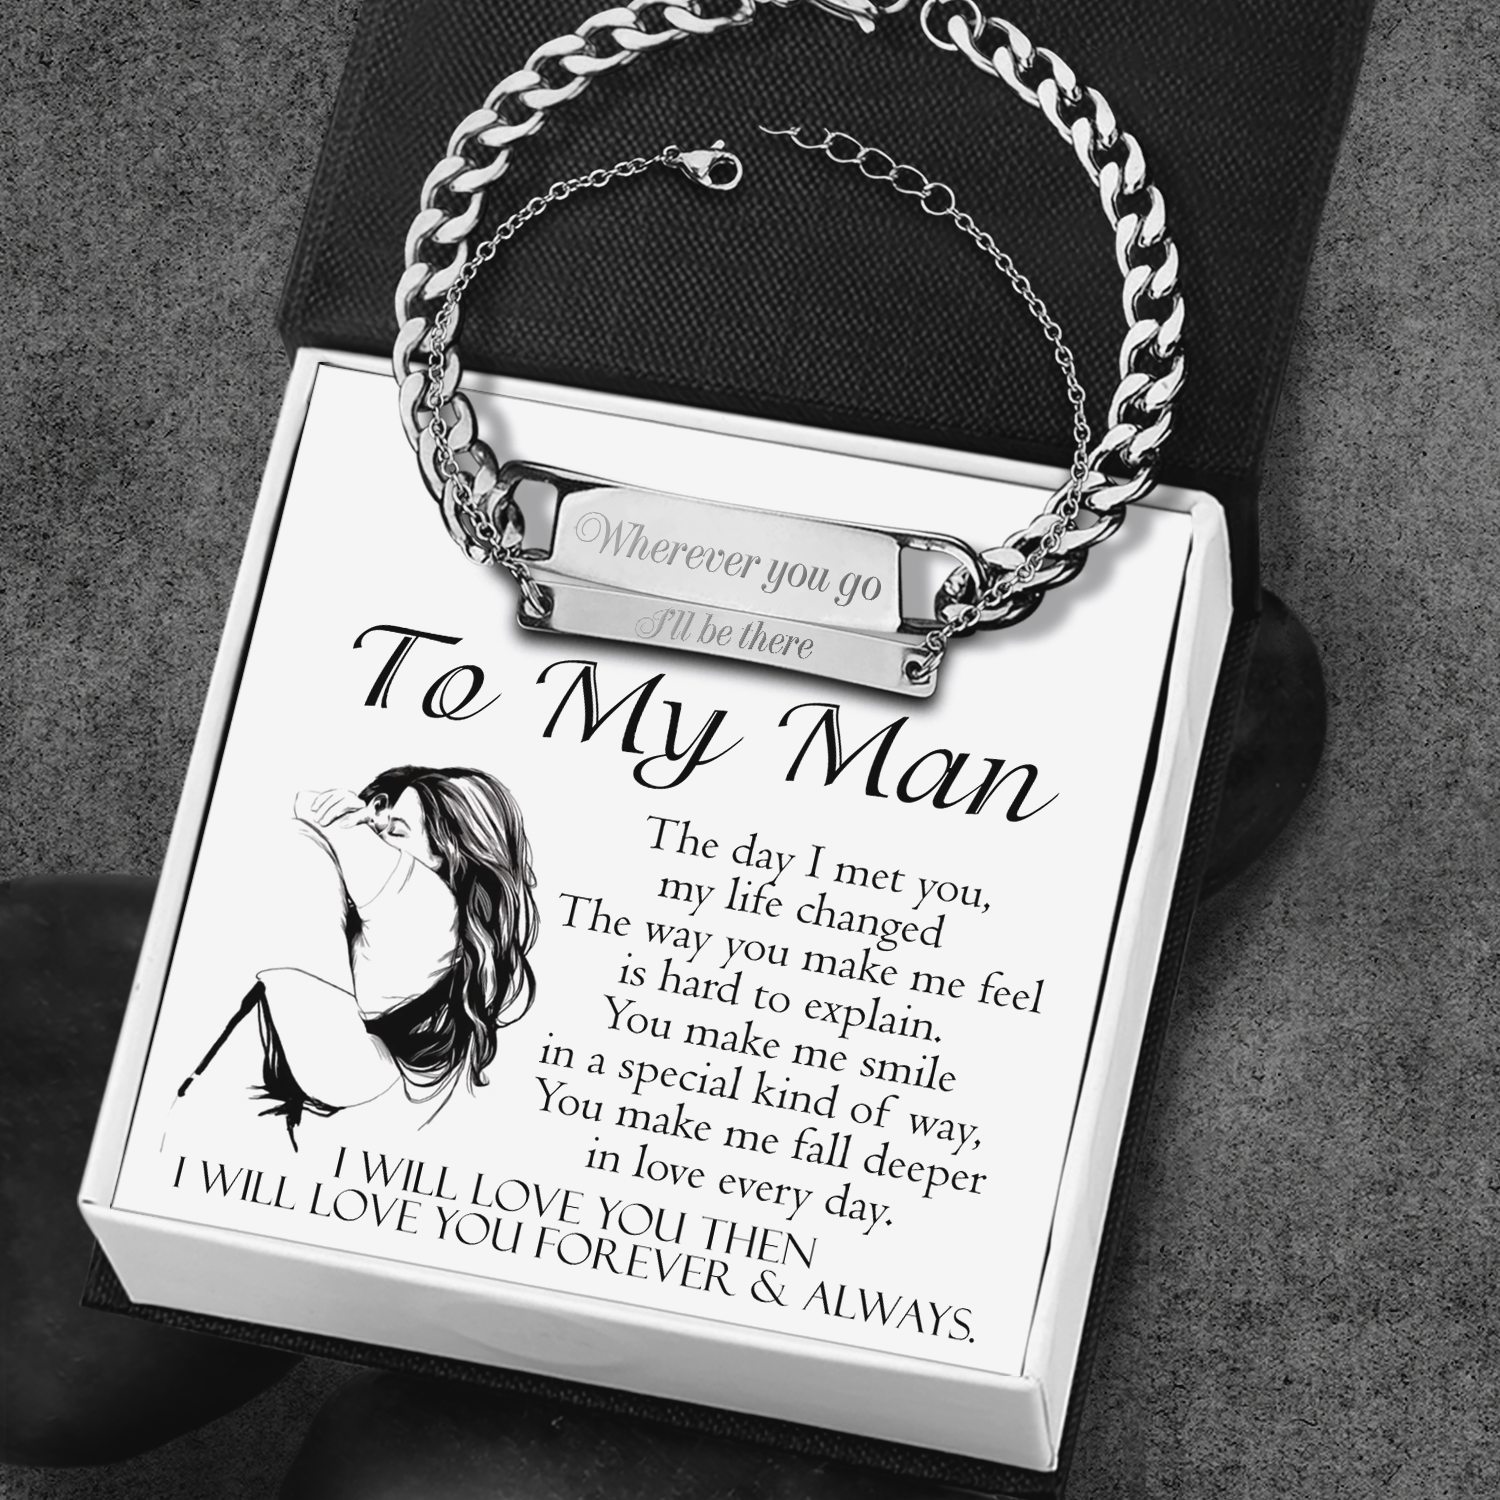 Engraving Couple Bracelet - Family - To My Man - You Make Me Fall Deeper In Love Every Day - Ukgbzb26005